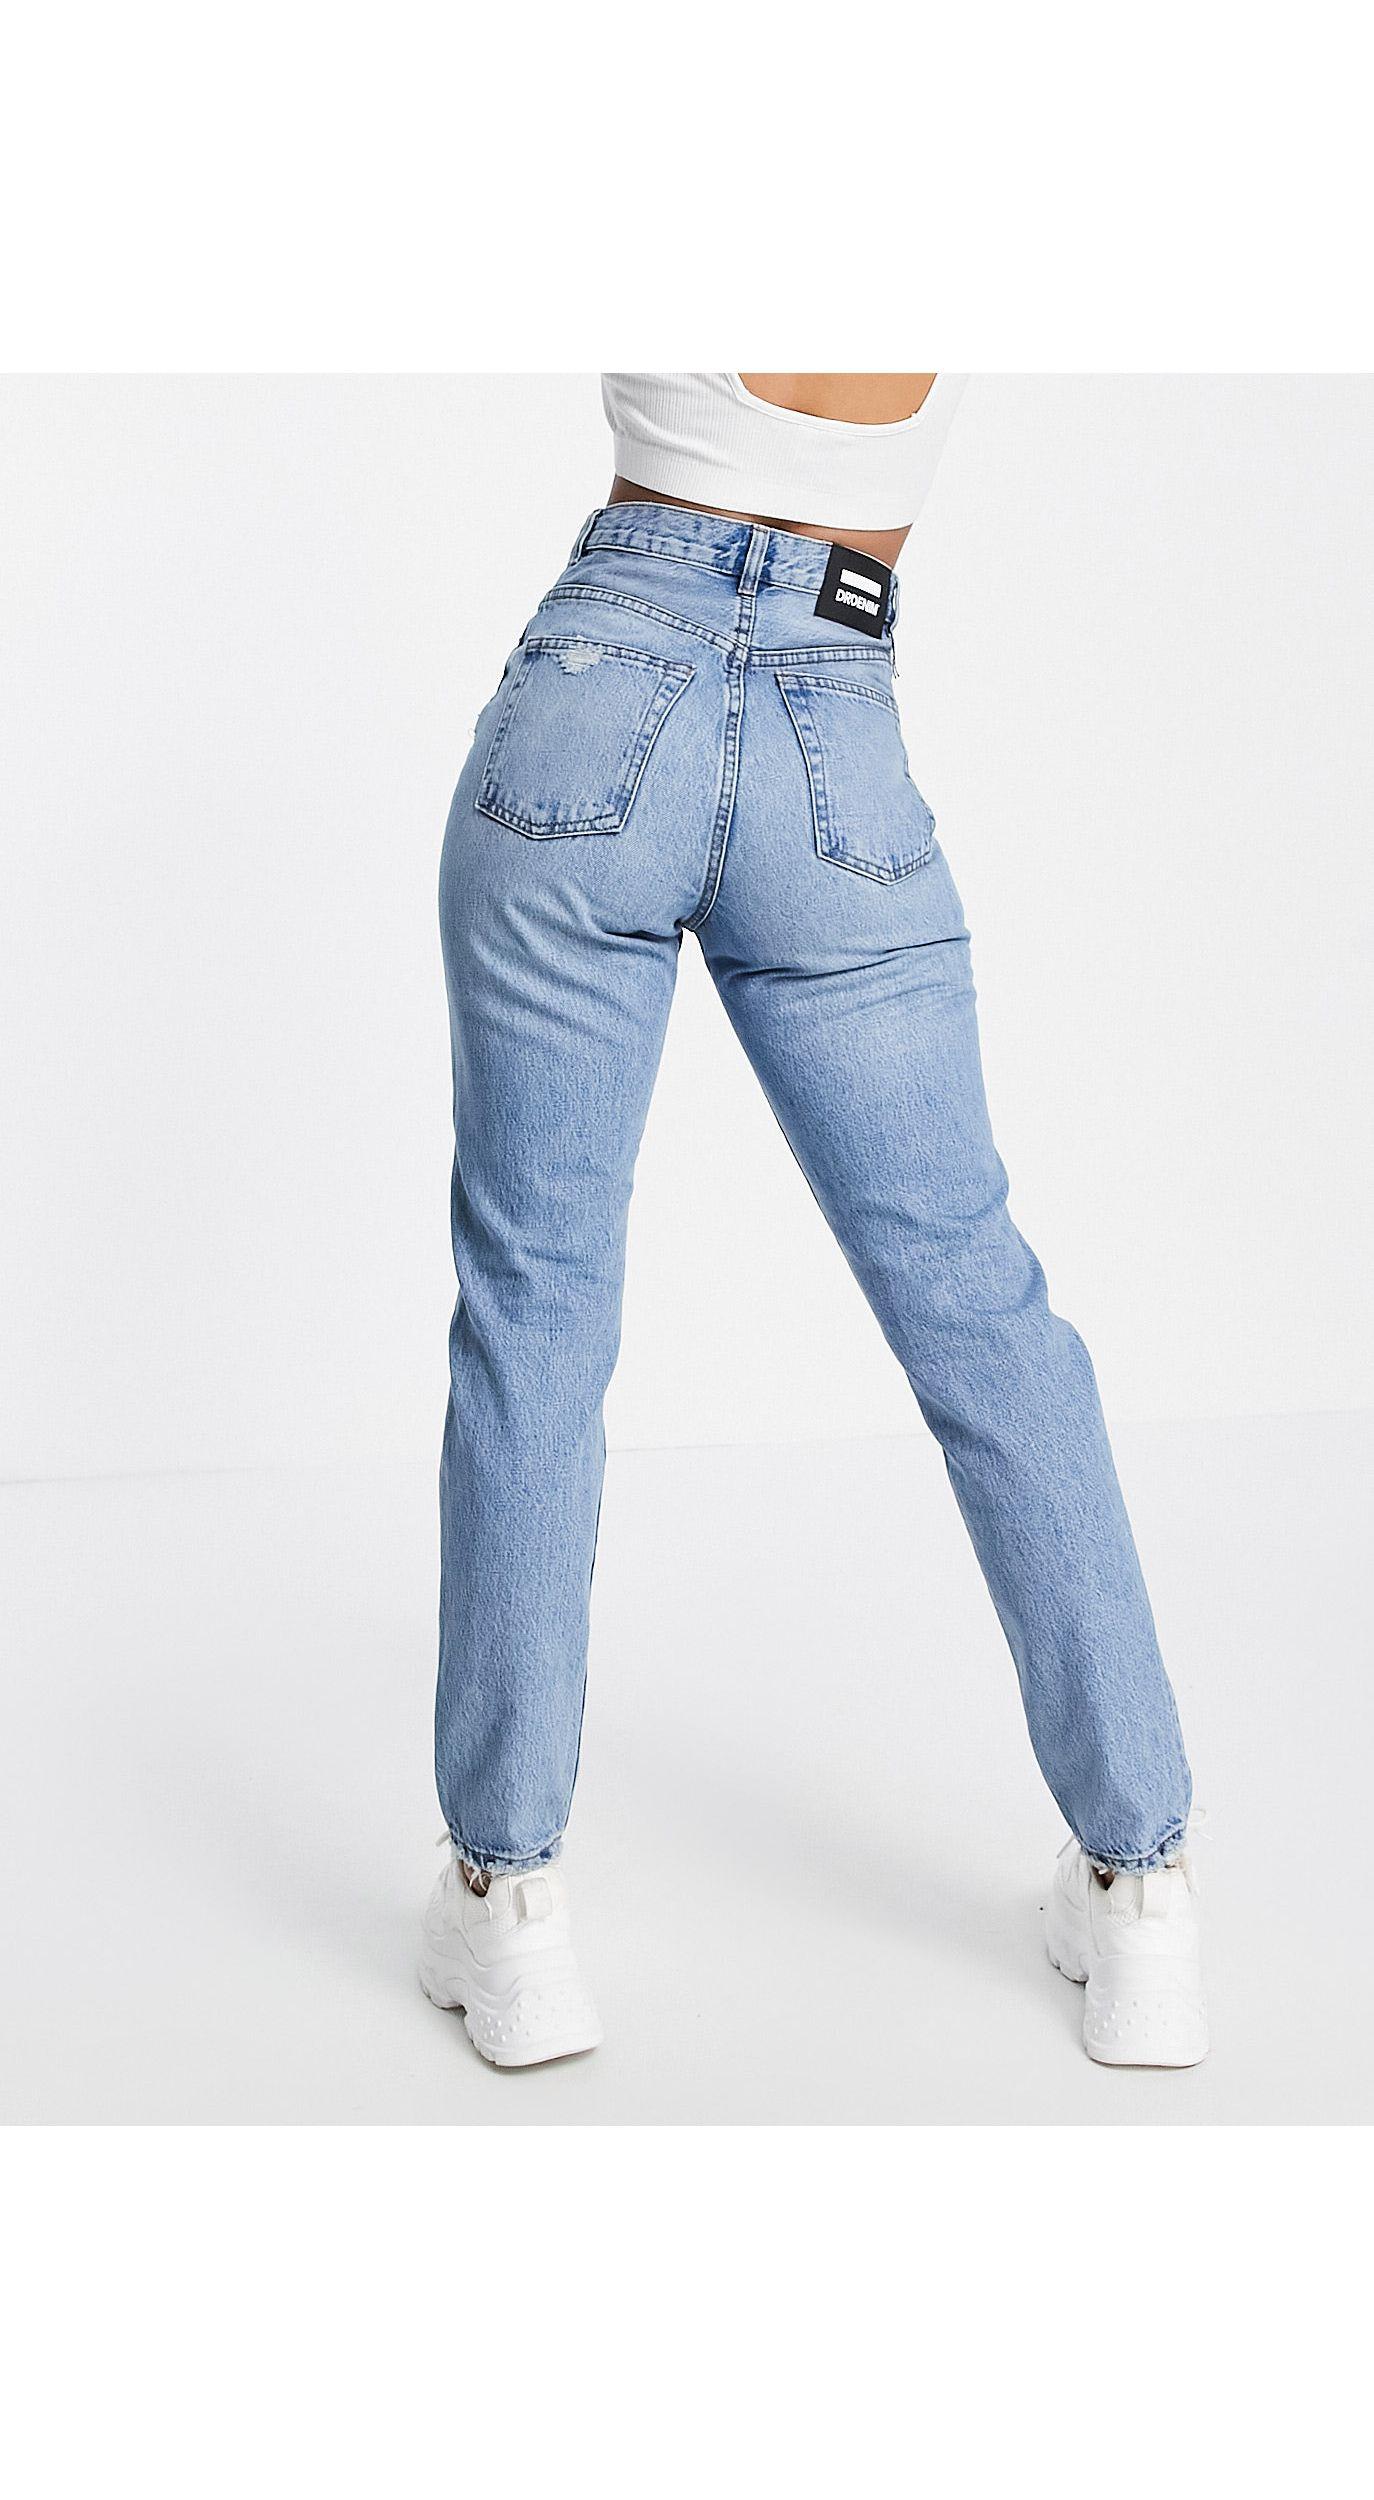 Dr. Denim Nora High Rise Mom Jeans With Ripped Knees in Blue